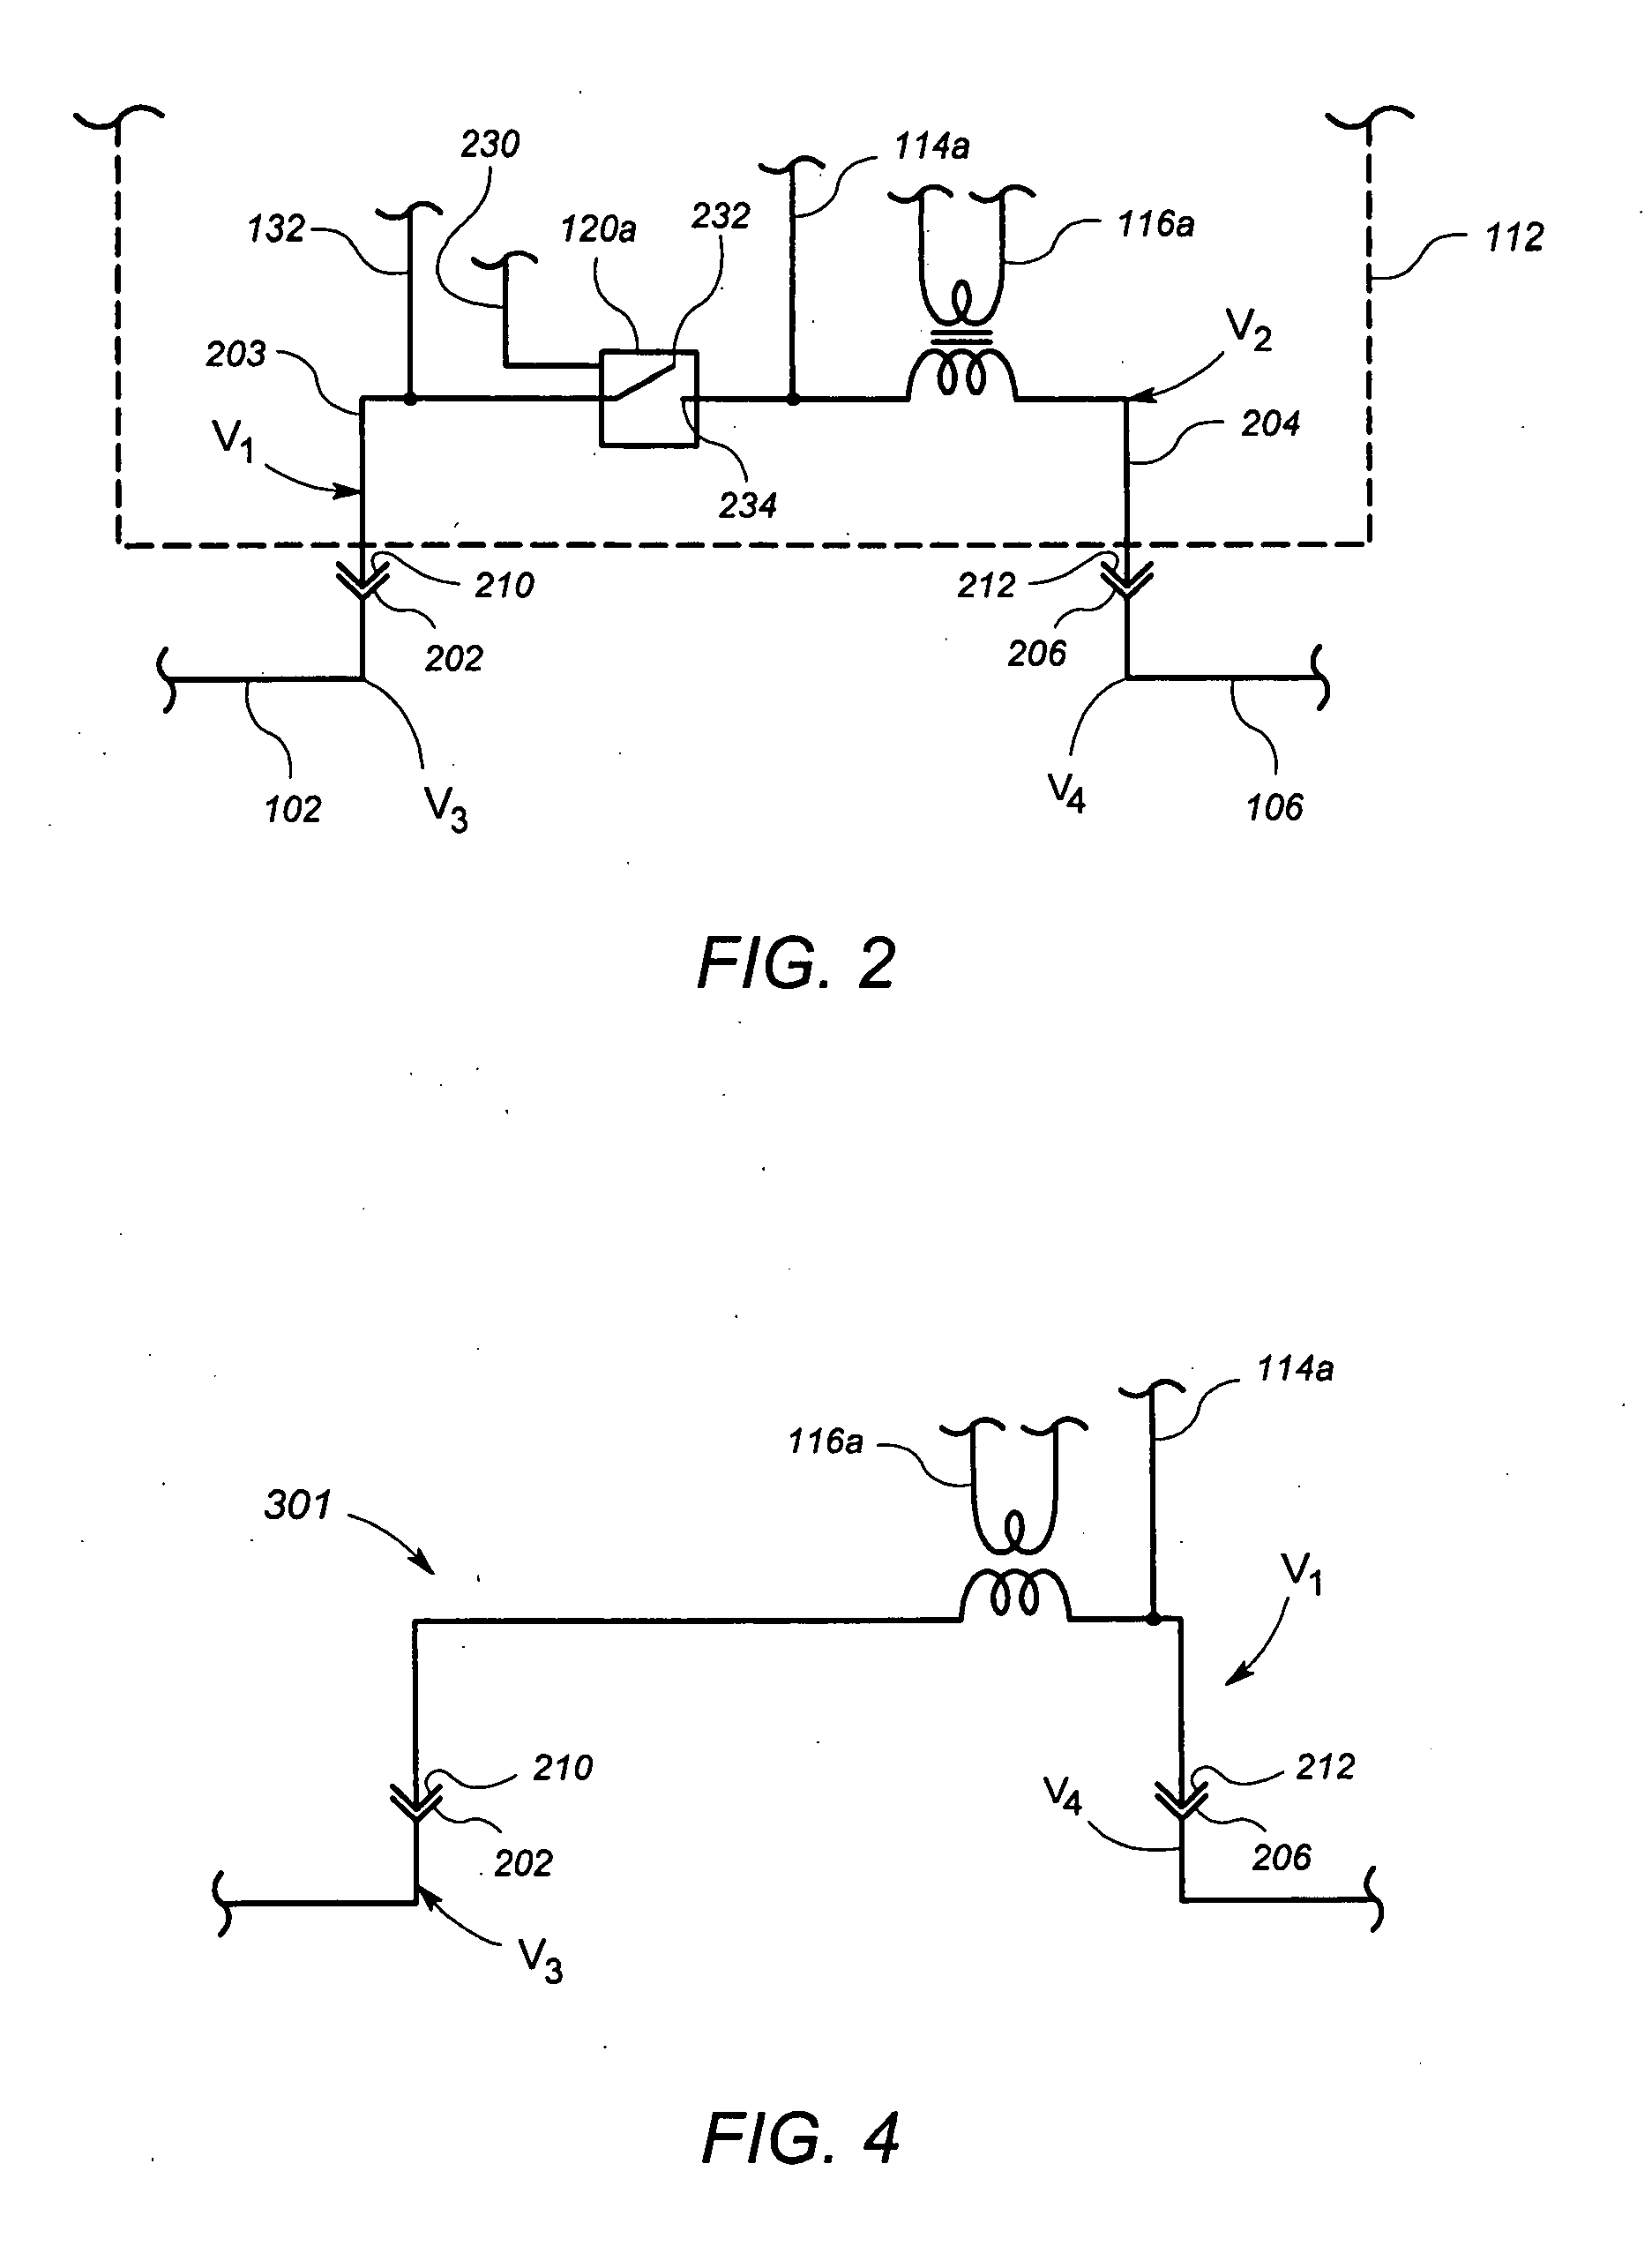 Apparatus and method for metering contact integrity